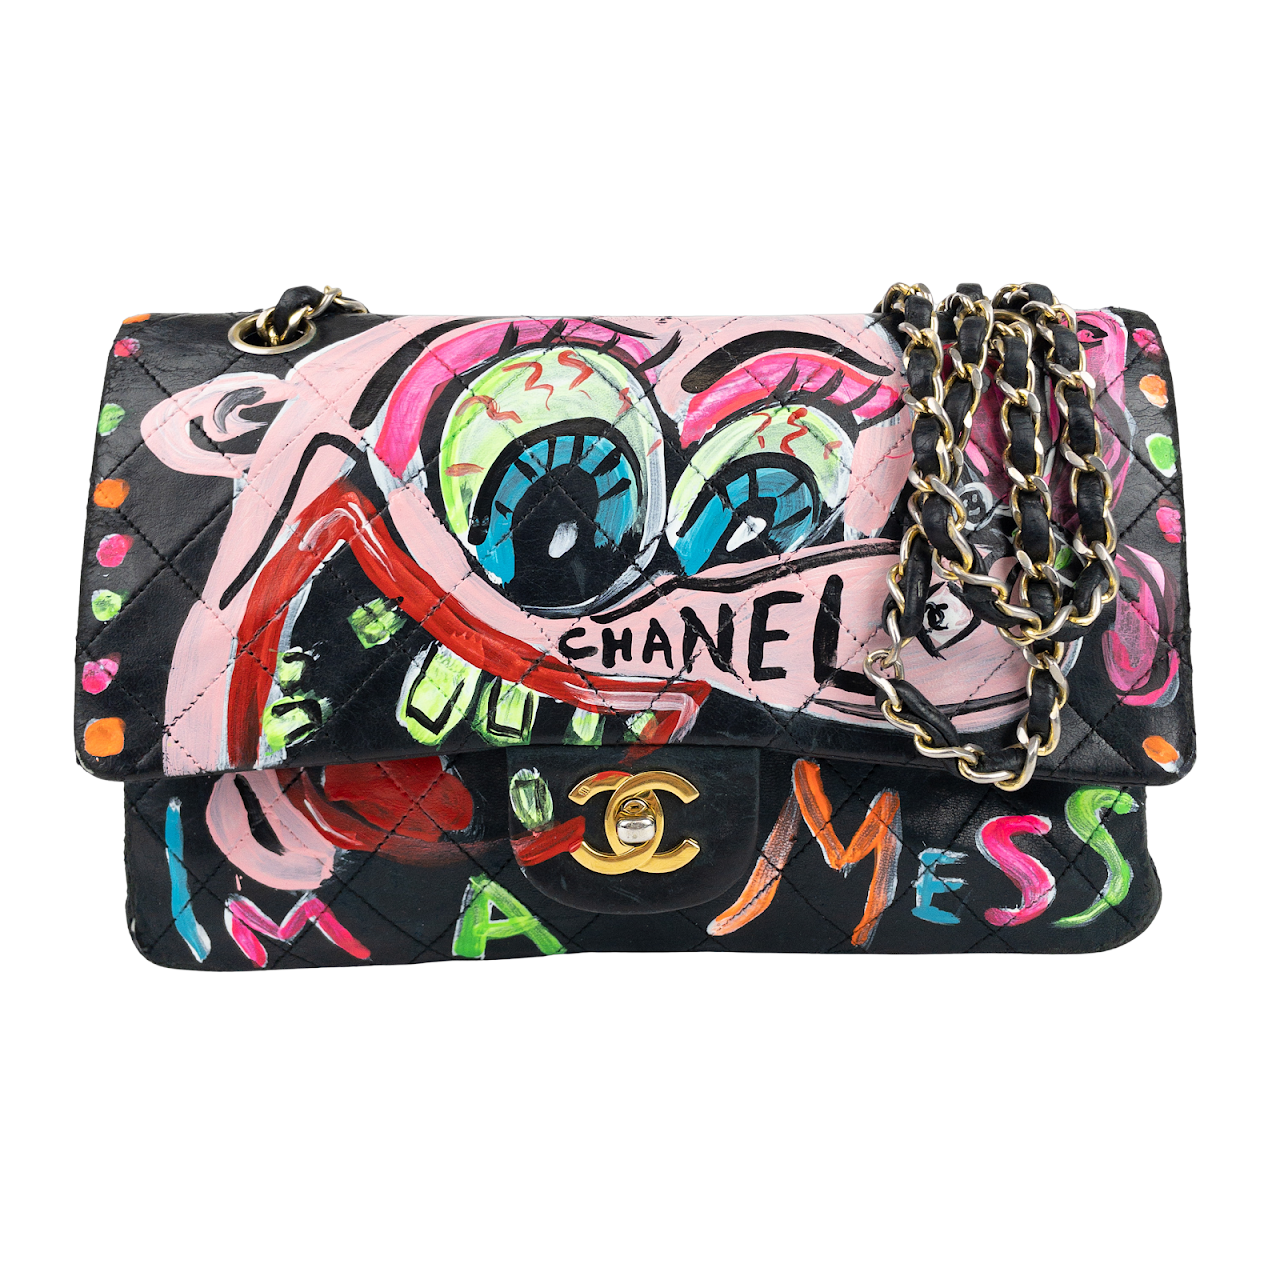 Scooter LaForge Custom Painted Chanel Bag